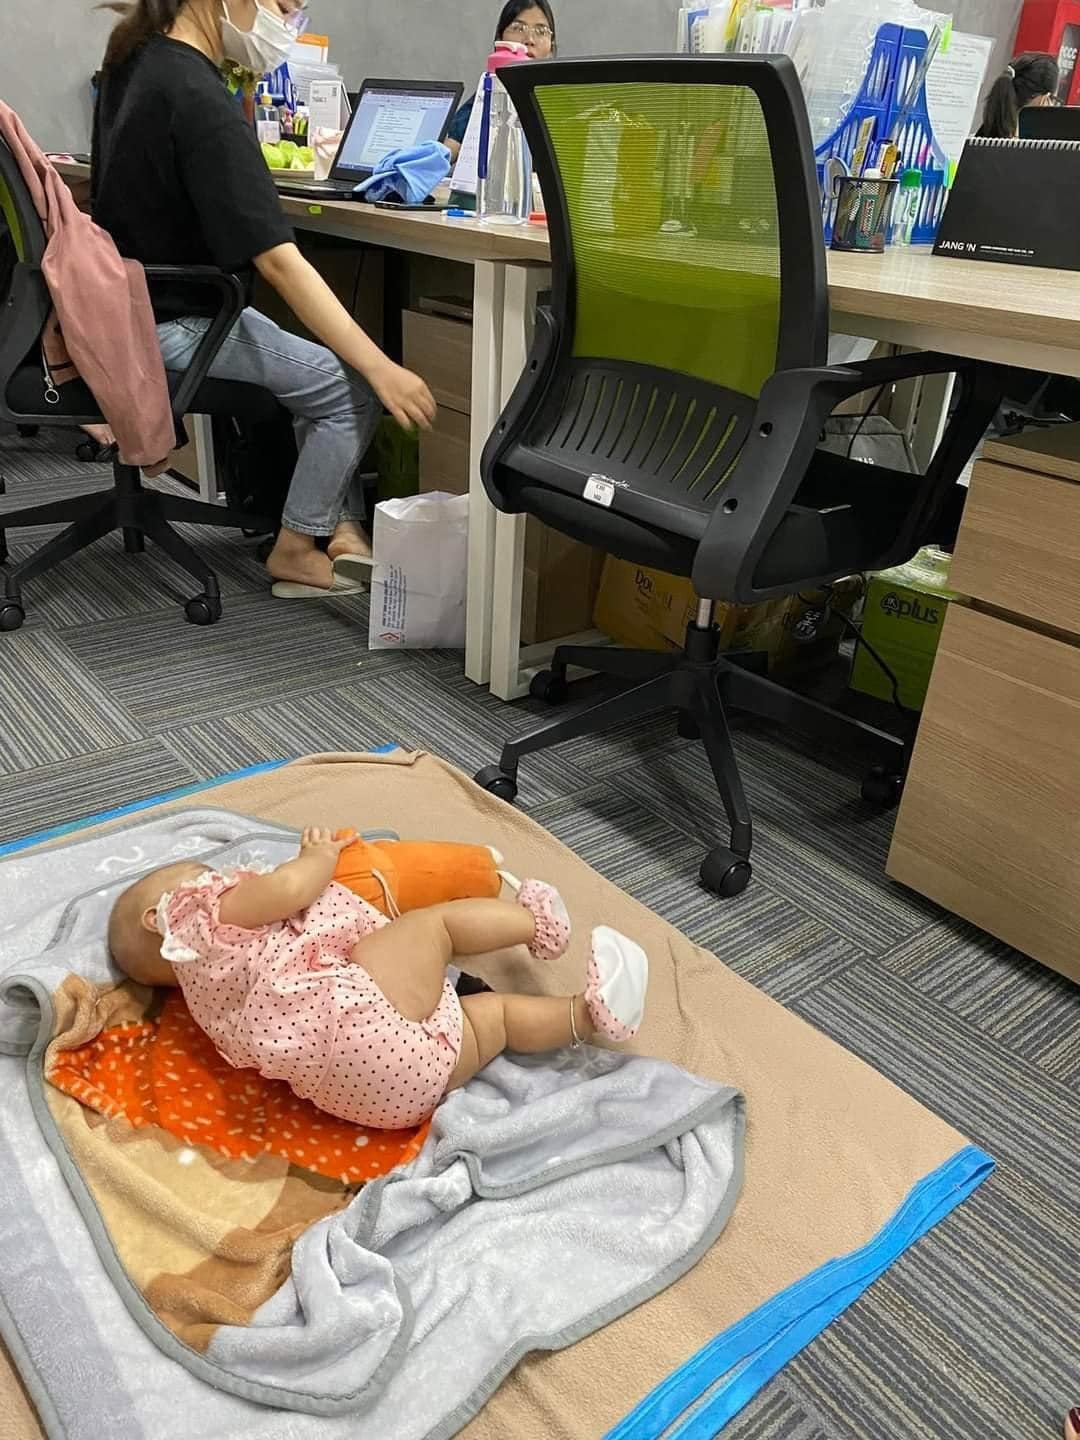 A rare sight of a baby swinging around in the middle of the office, many people empathize with his mother after the maternity leave